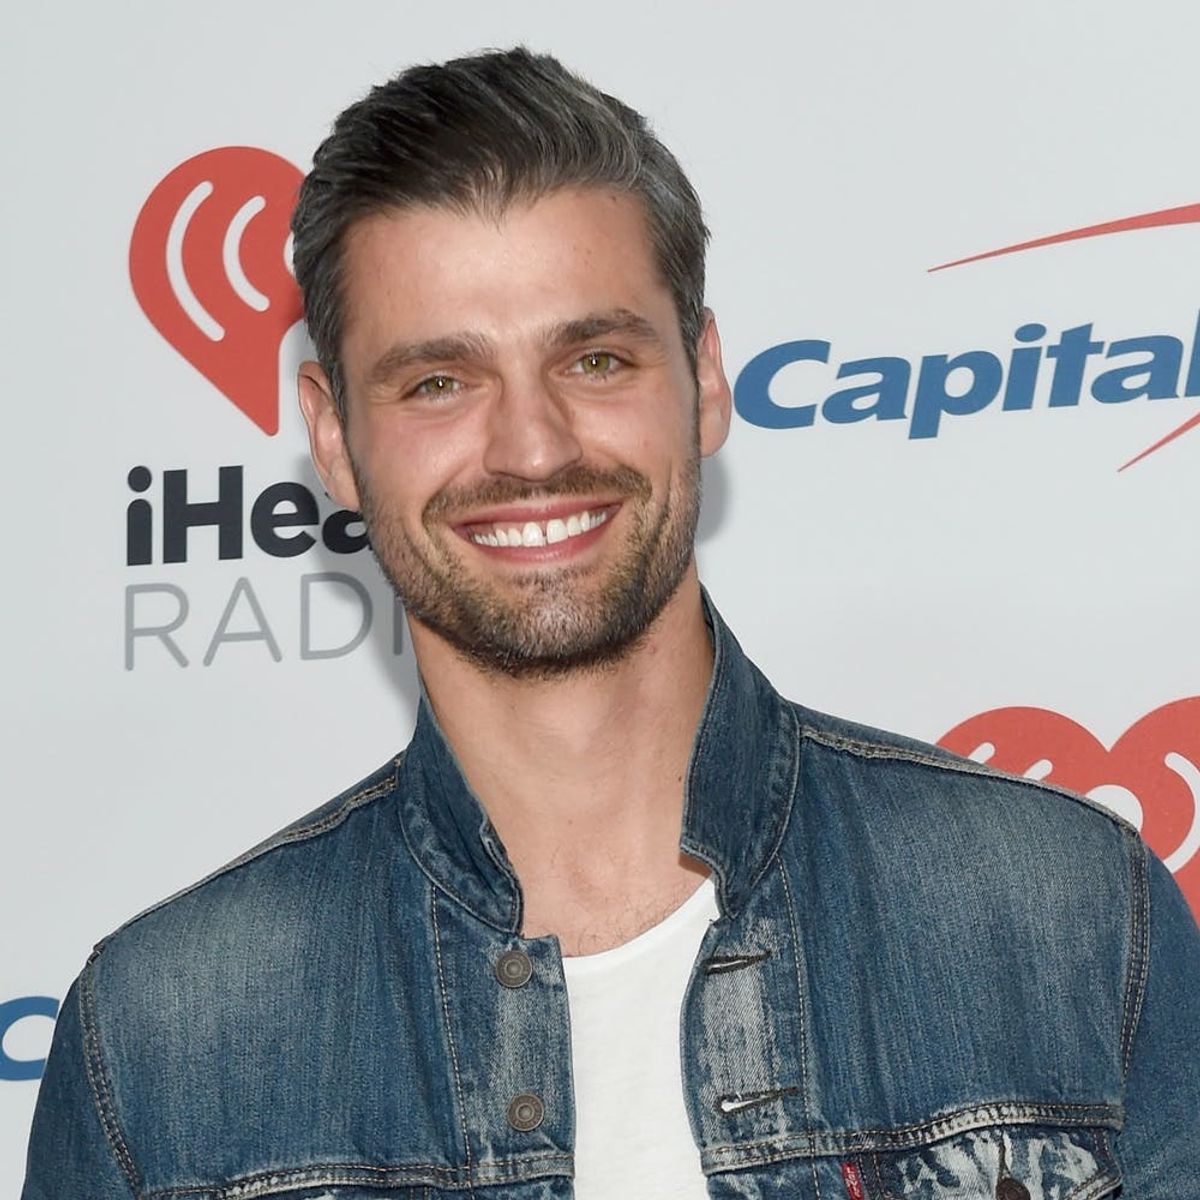 Peter Kraus Will Look for Love on the “Bachelor Winter Games” Spinoff